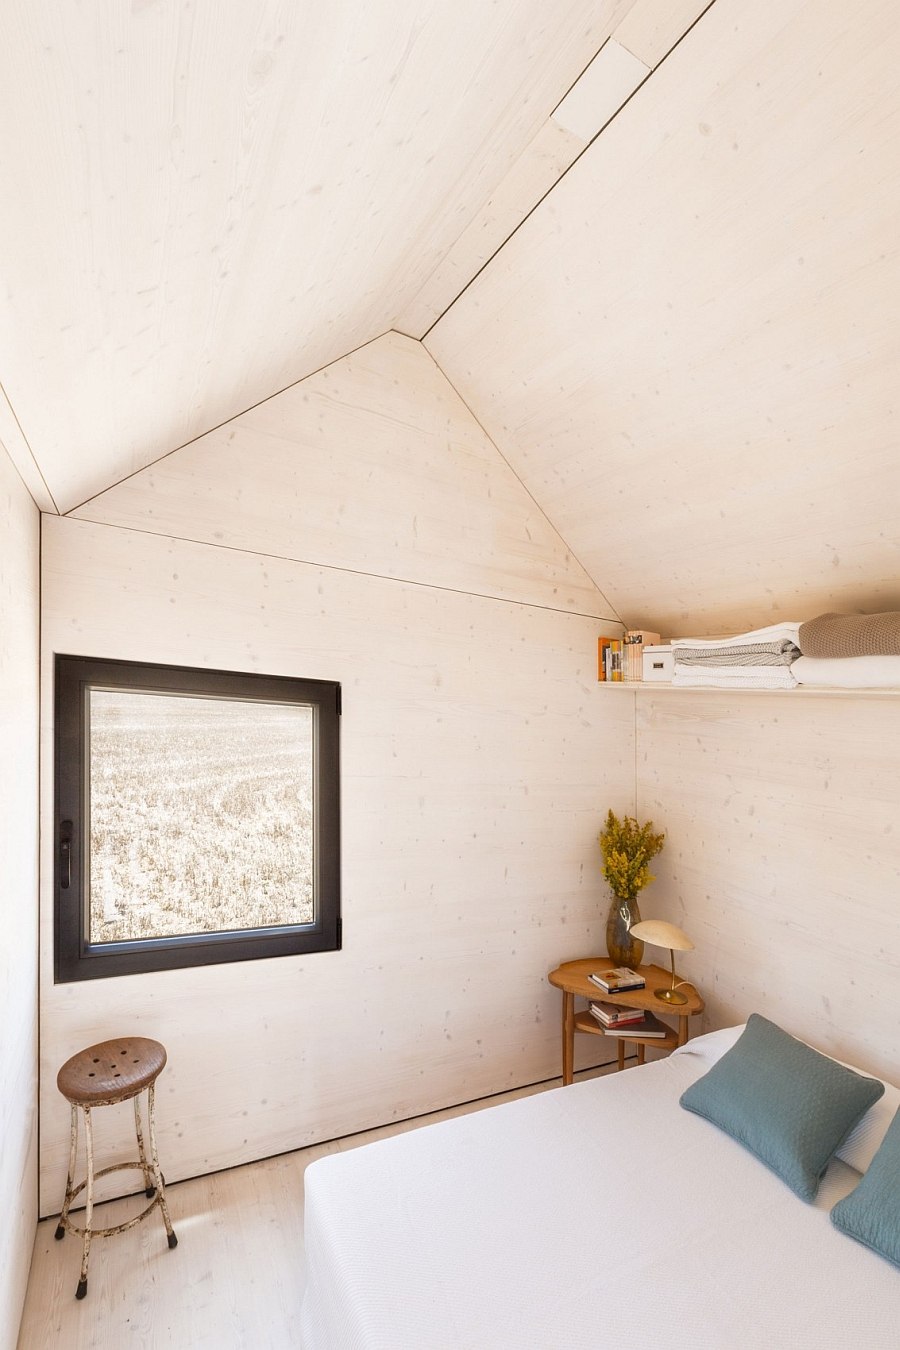 Tiny bedroom of the transportable micro home